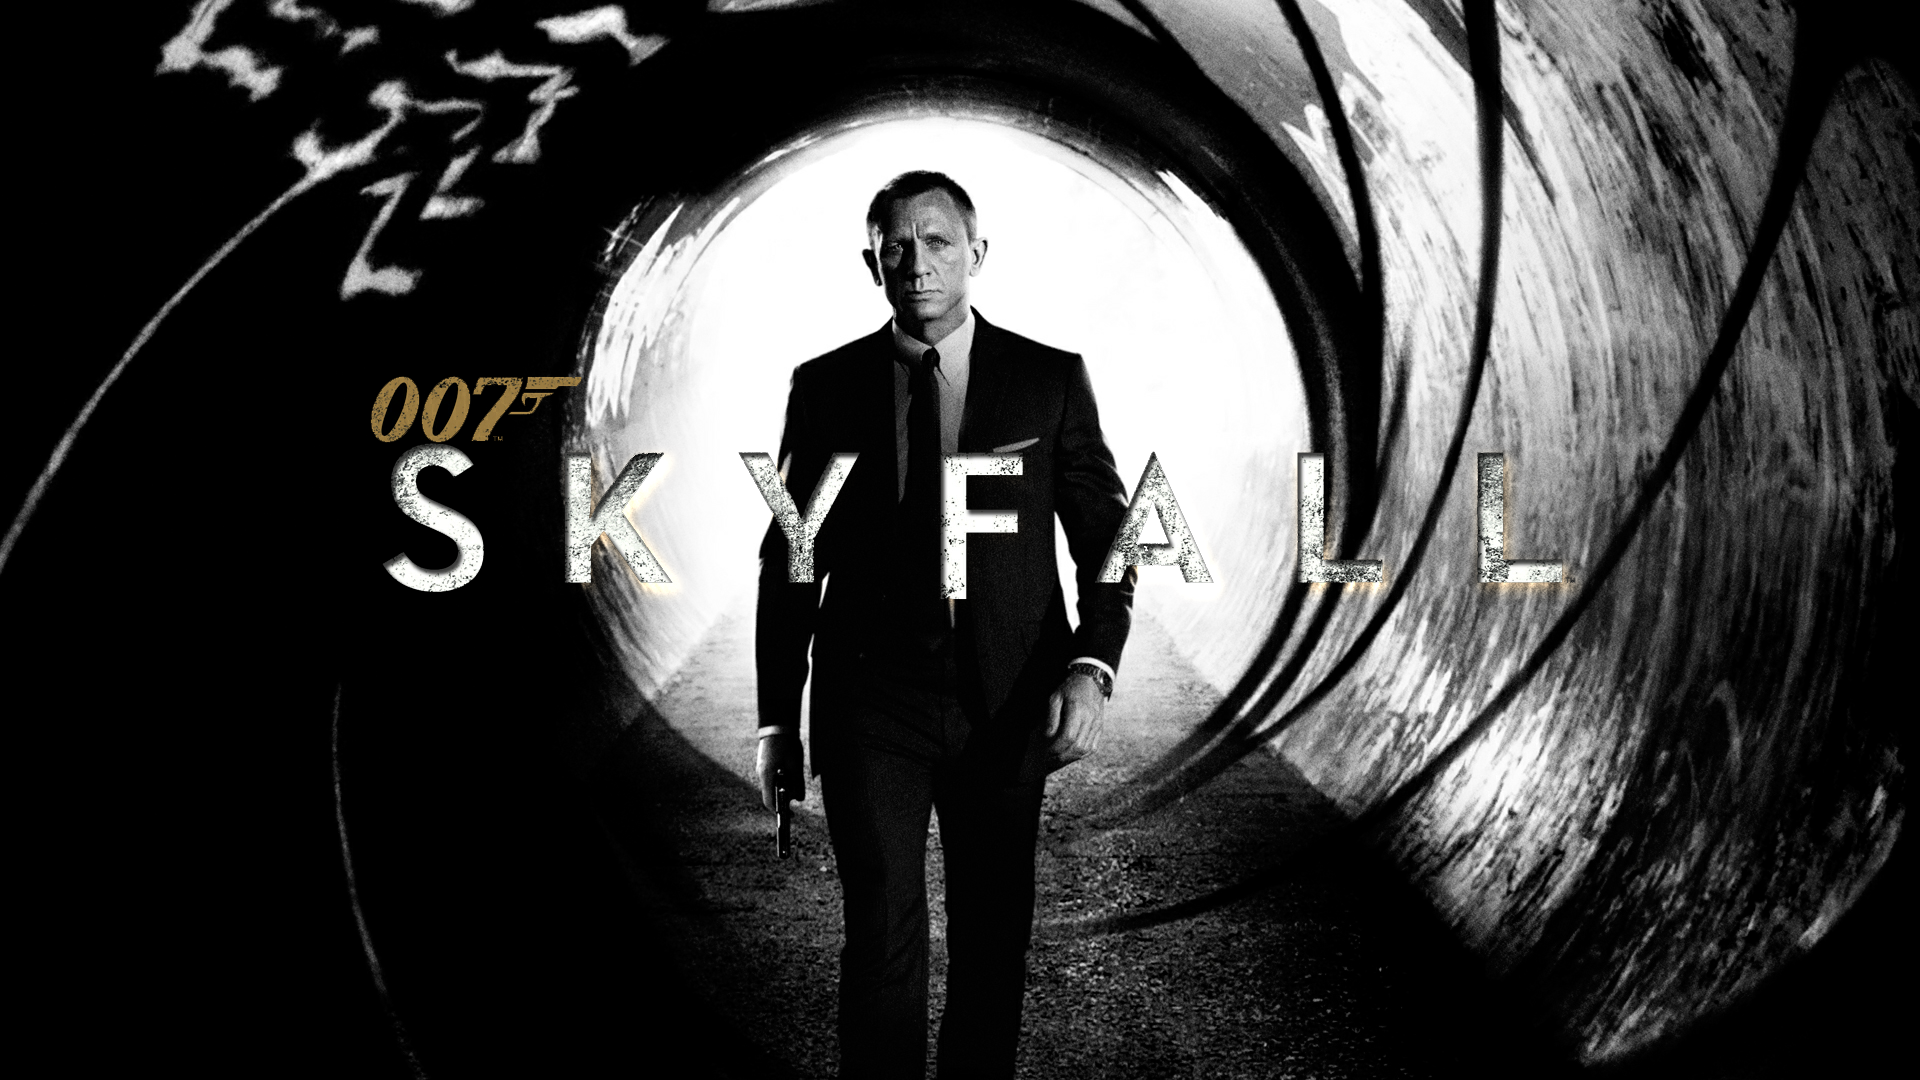 Check This Out Our New Skyfall Wallpaper